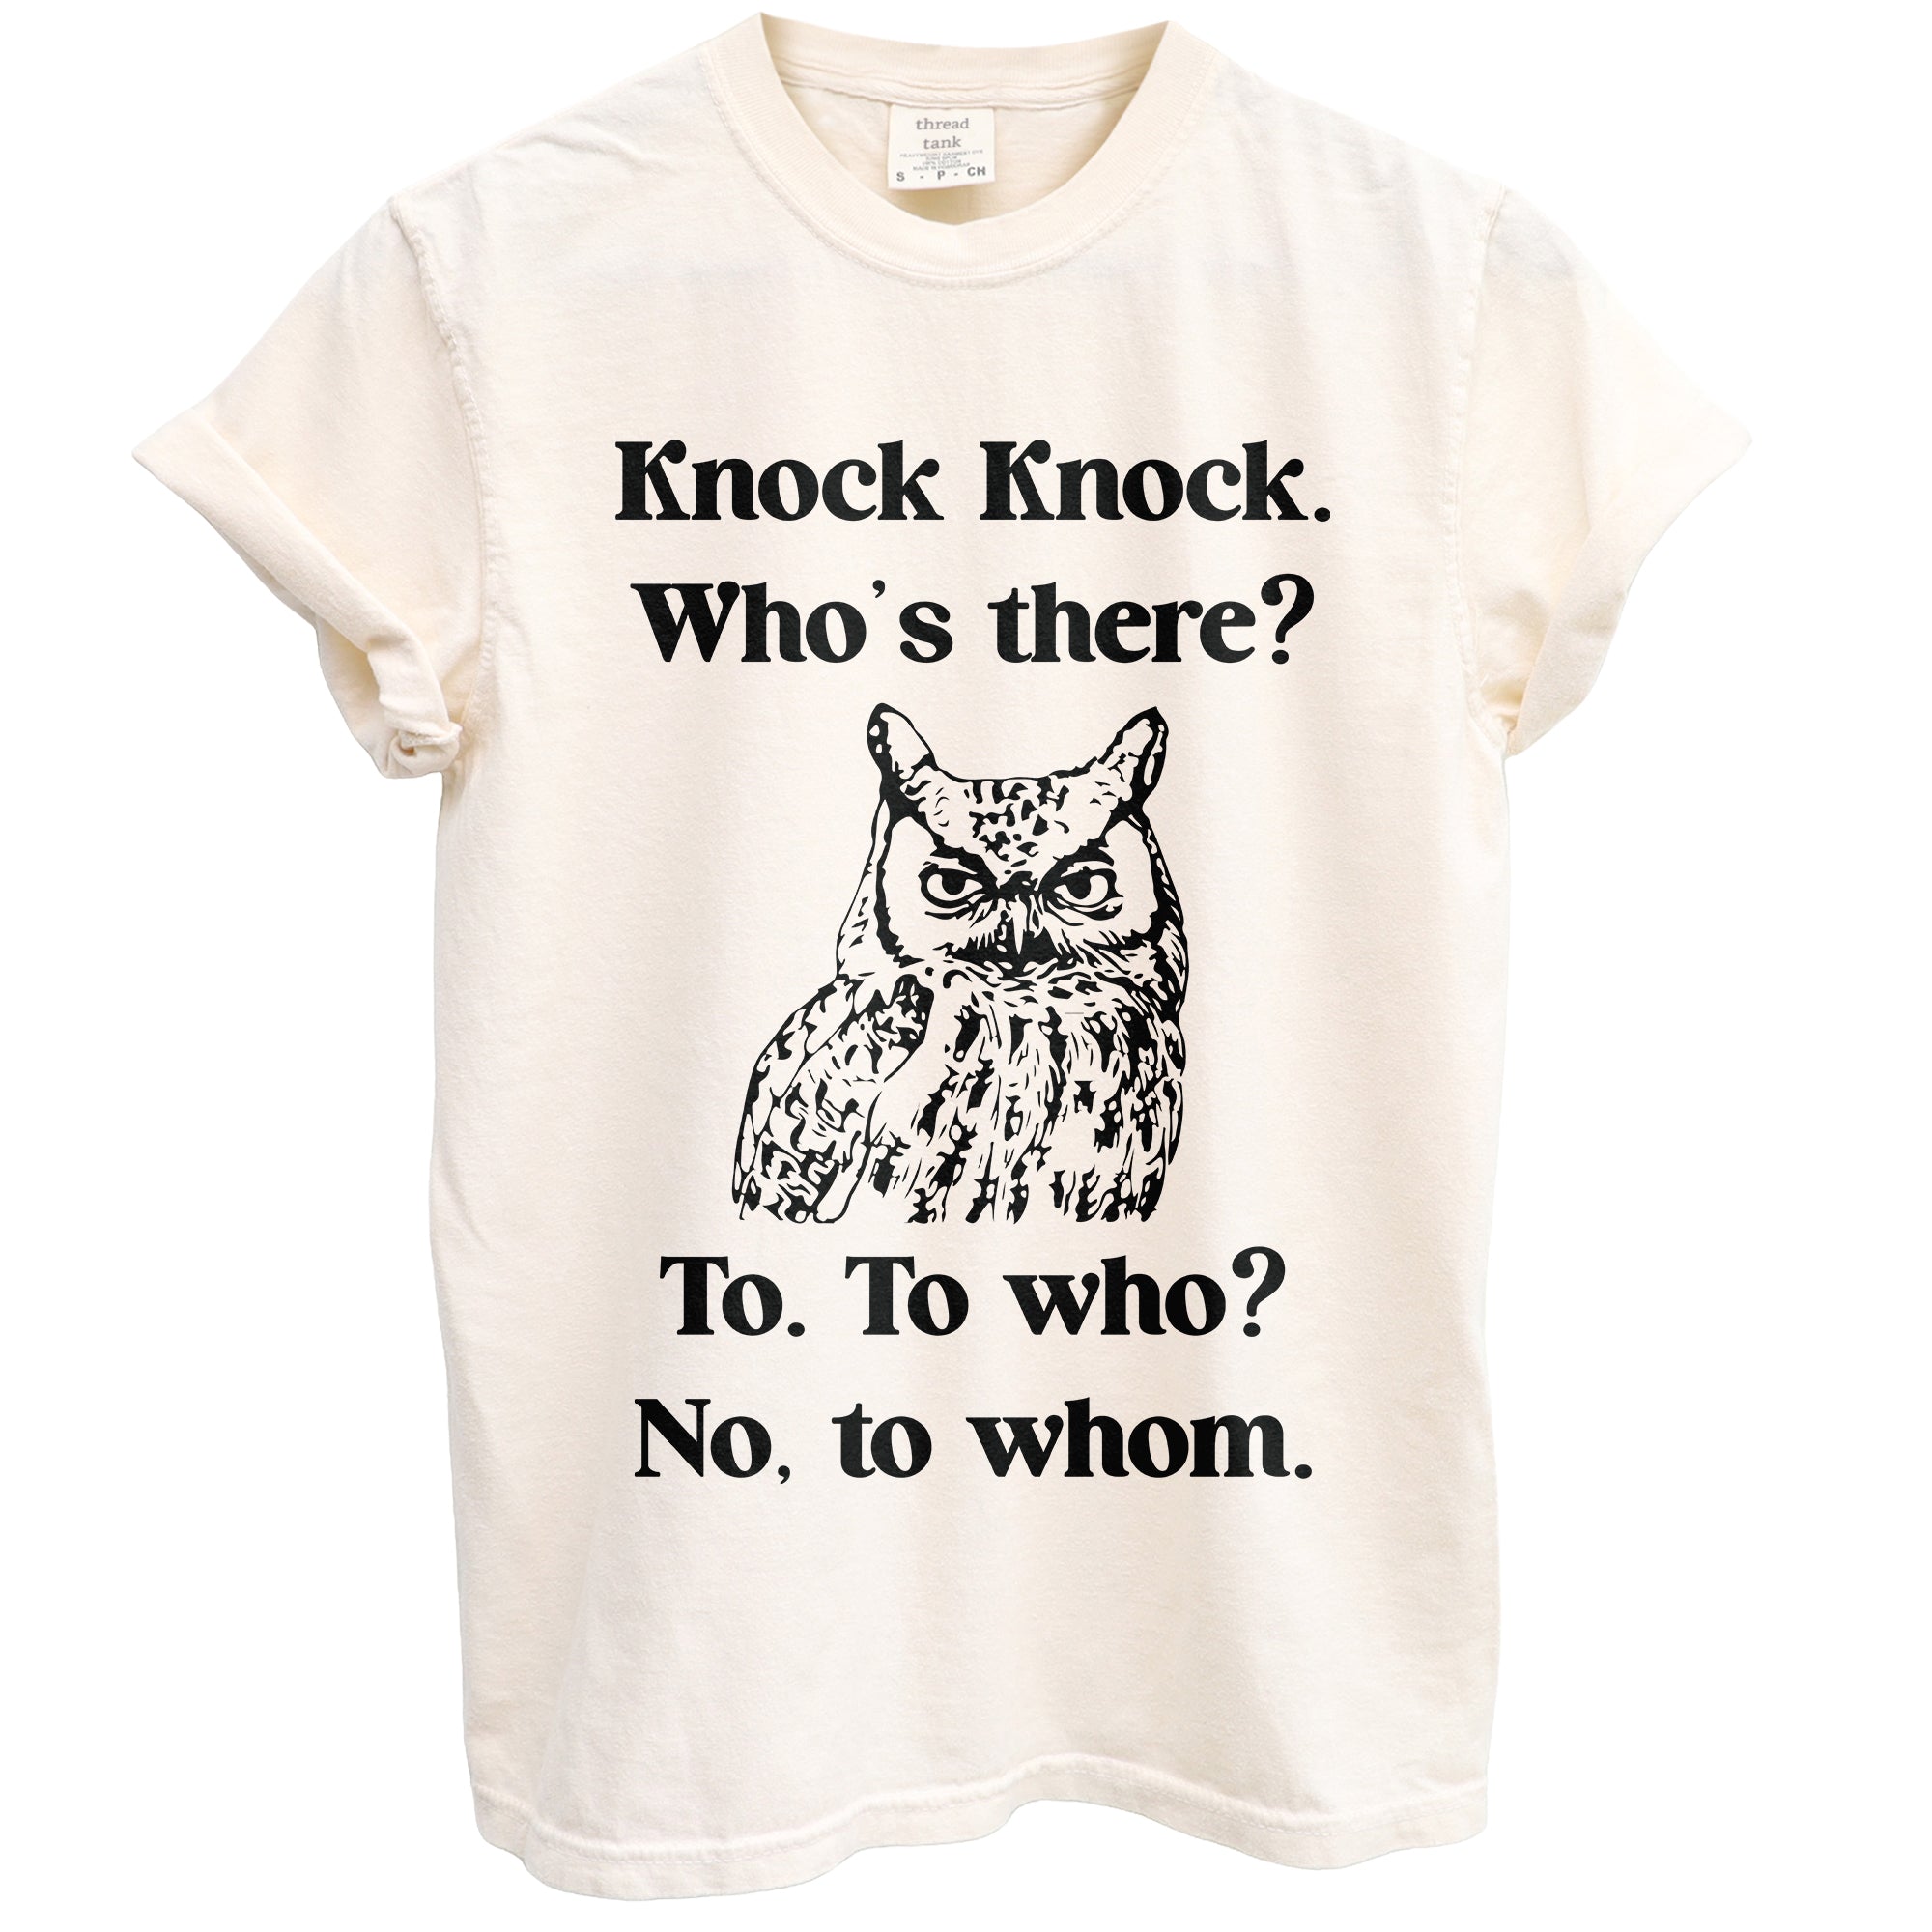 Knock Knock Garment-Dyed Tee - Stories You Can Wear